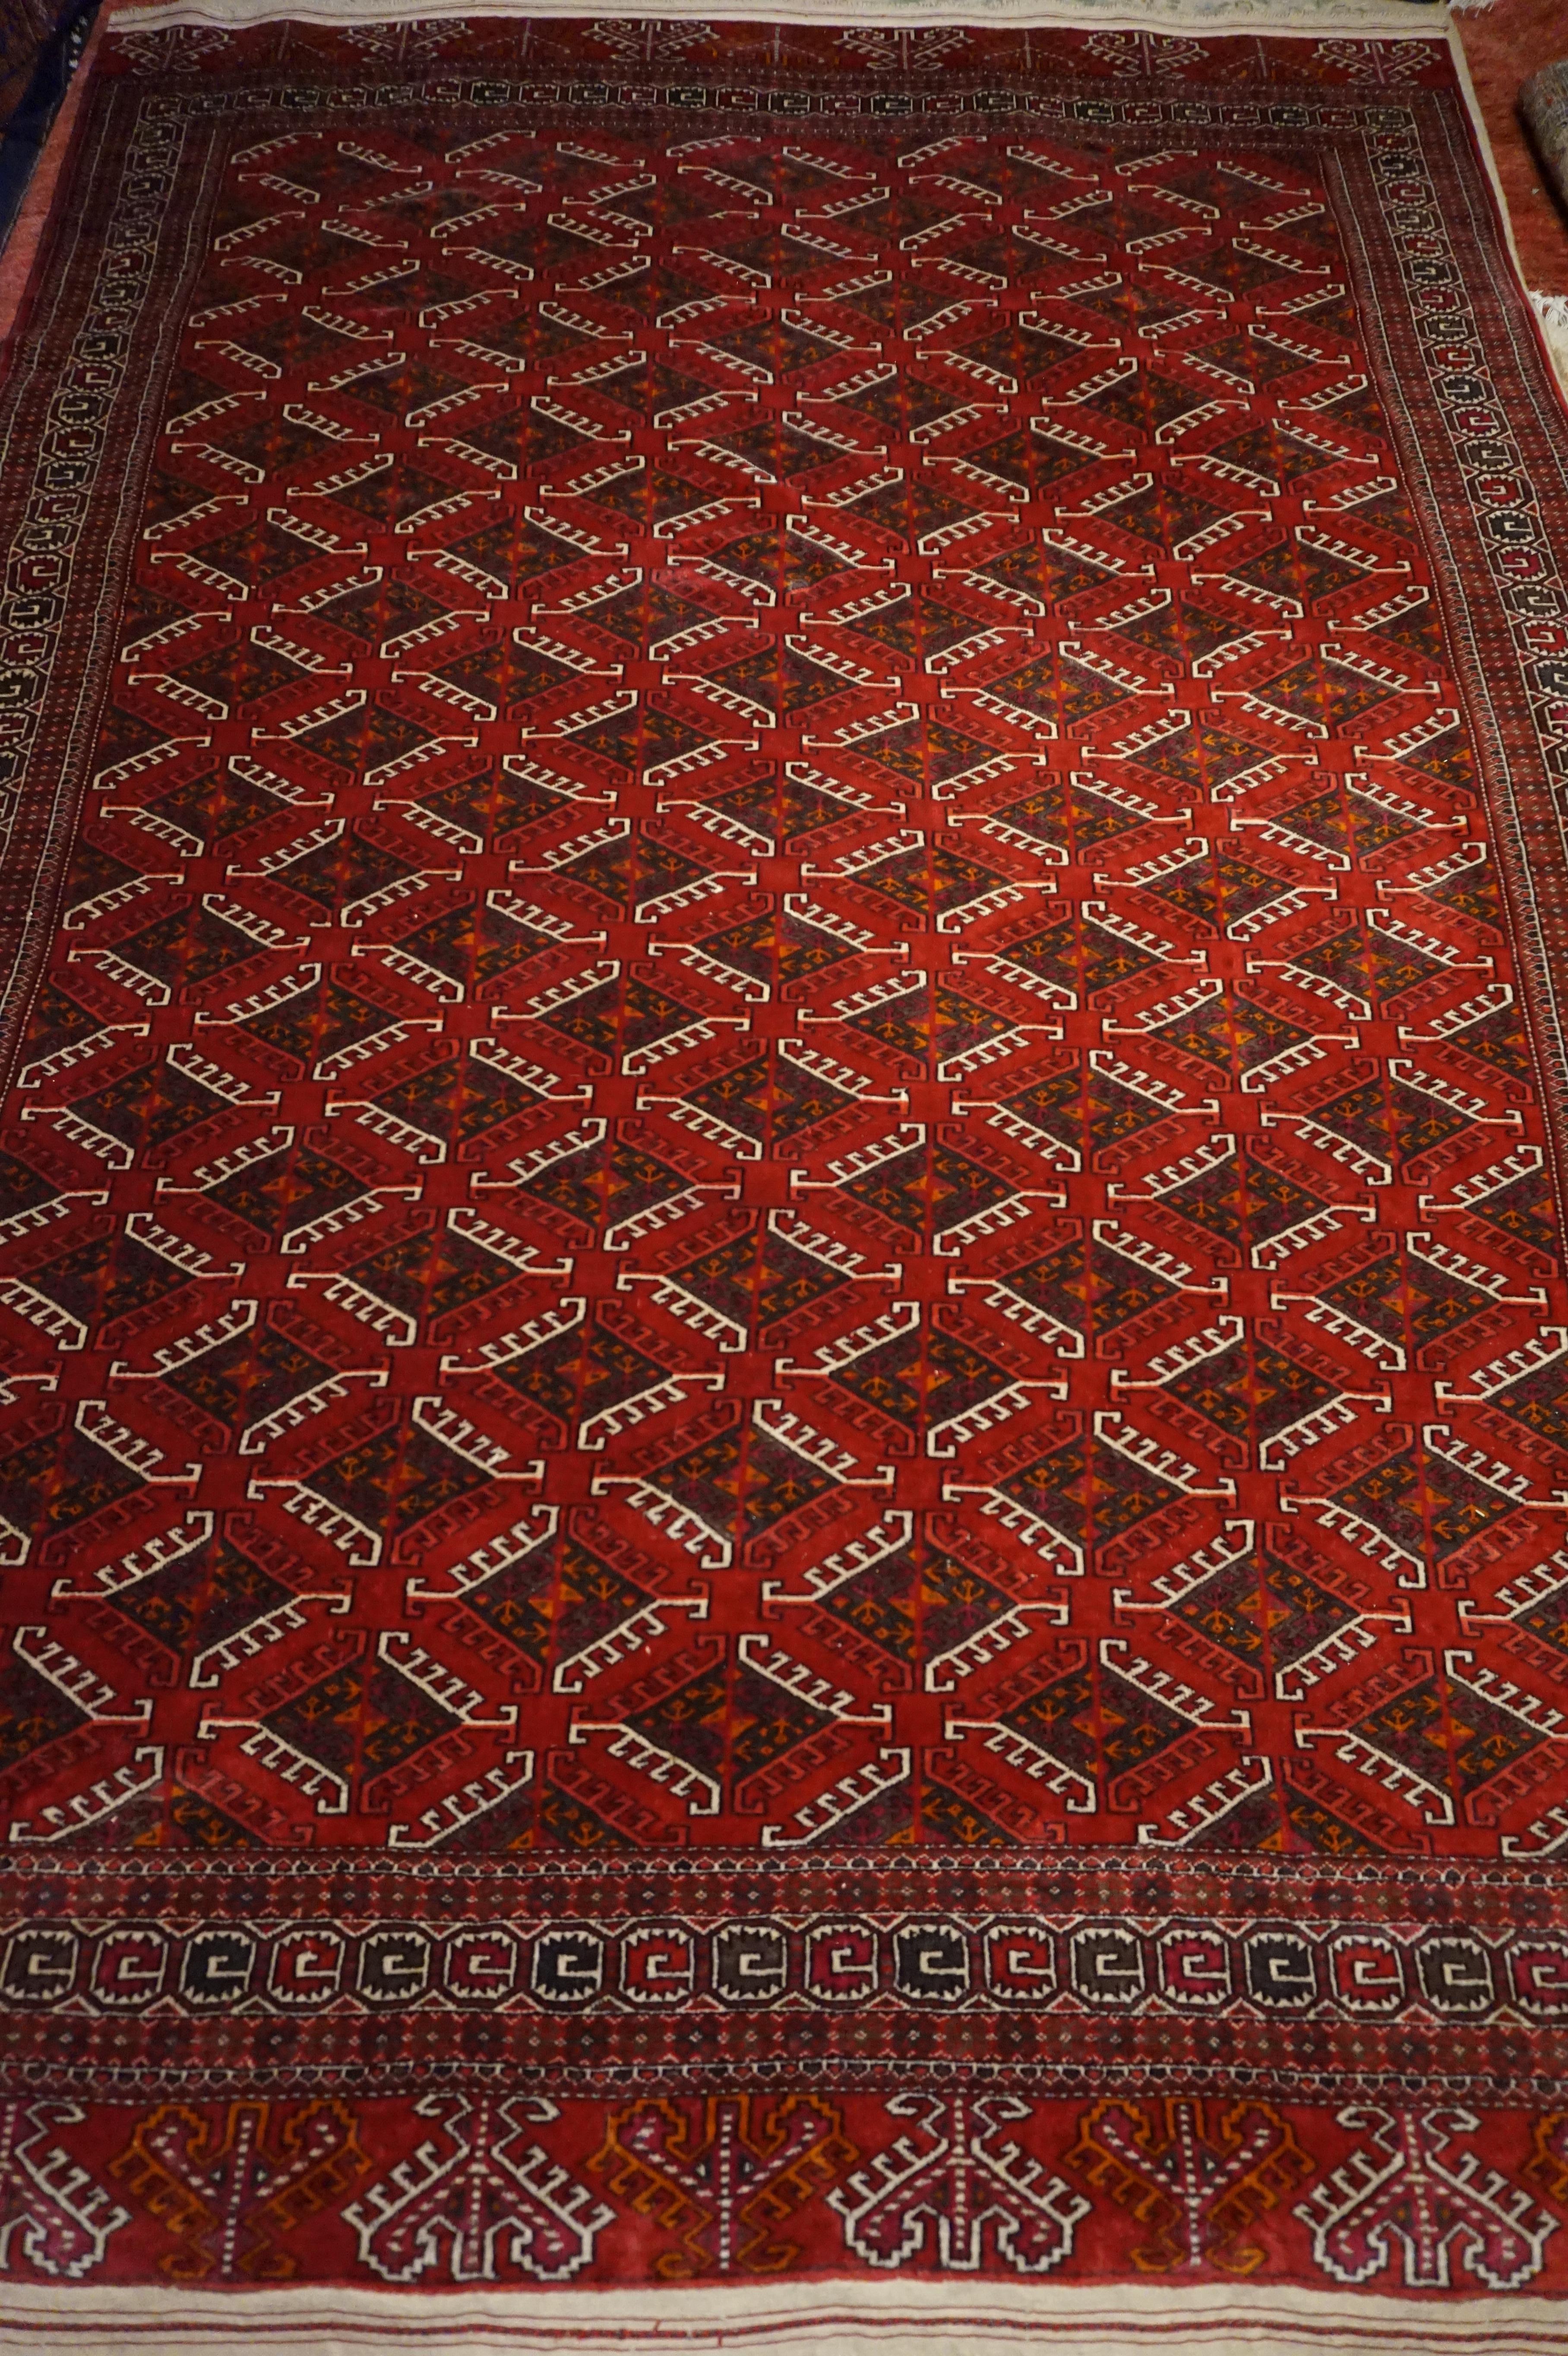 Very fne Turkmen tribal rug tightly hand knotted in soft, luxurious wool. Speaks for itself. The pile is in healthy condition. Excellent symmetry and vivid red shade. The fringe is intact. Presents well.